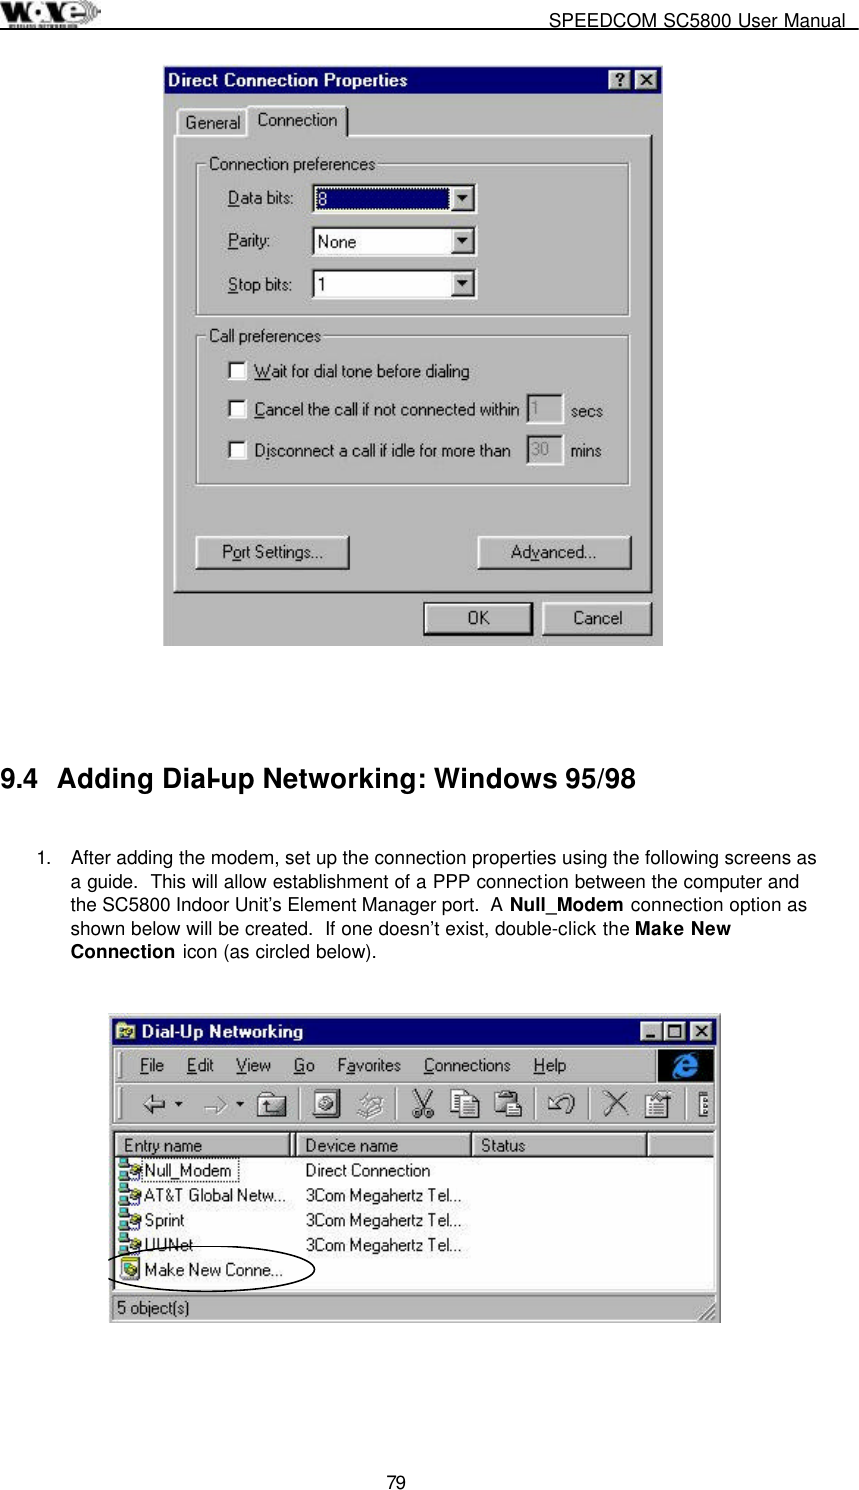     SPEEDCOM SC5800 User Manual  79    9.4  Adding Dial-up Networking: Windows 95/98  1.  After adding the modem, set up the connection properties using the following screens as a guide.  This will allow establishment of a PPP connection between the computer and the SC5800 Indoor Unit’s Element Manager port.  A Null_Modem connection option as shown below will be created.  If one doesn’t exist, double-click the Make New Connection icon (as circled below).      